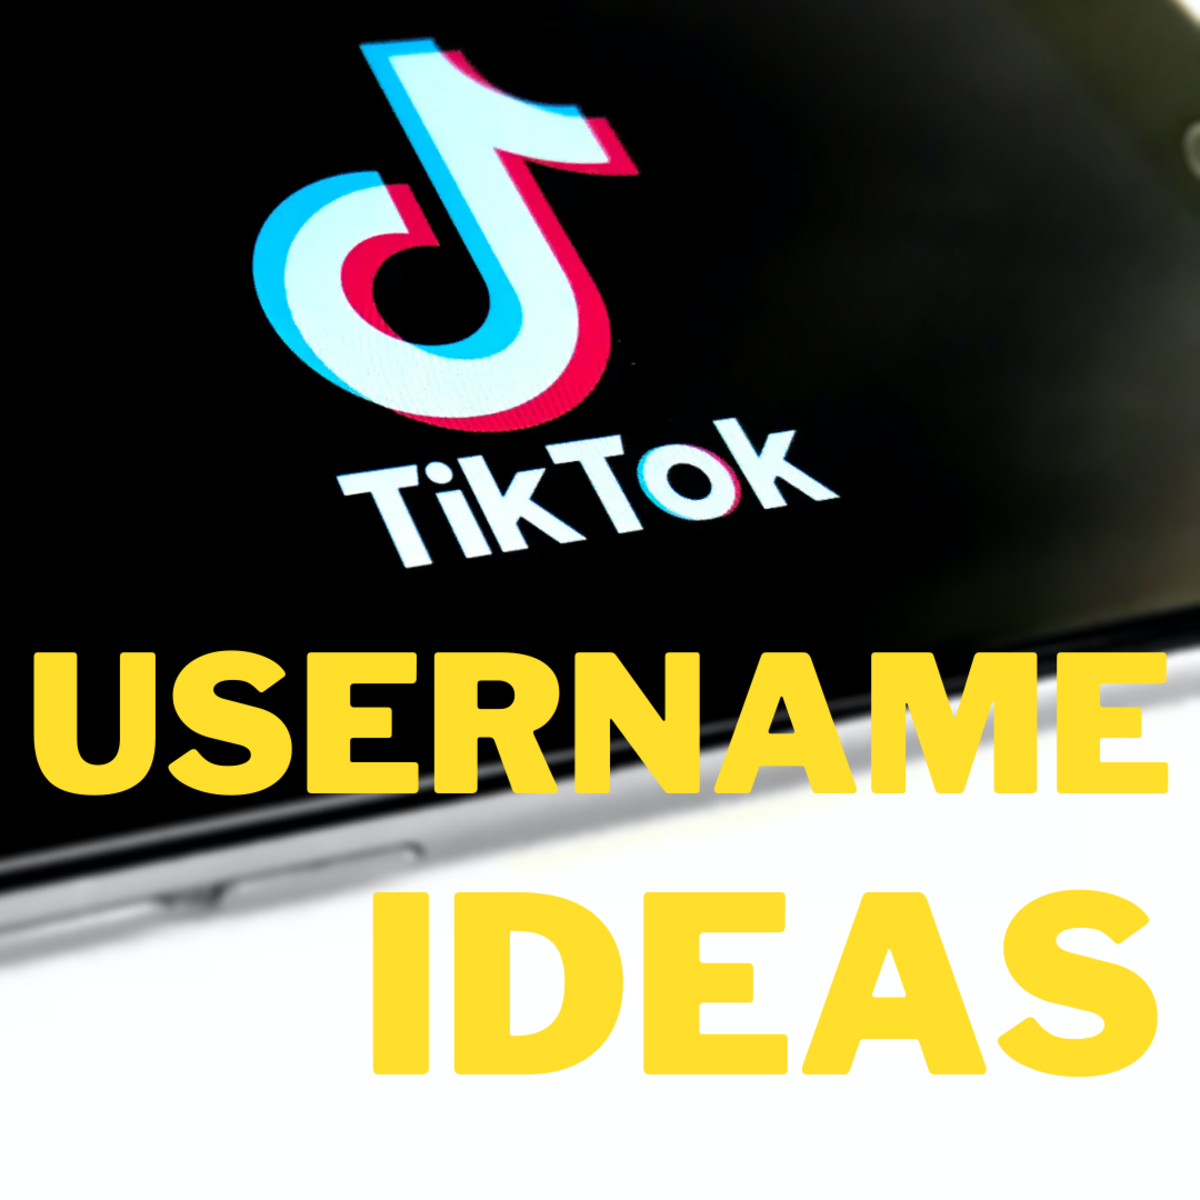 200 Tiktok Username Ideas And Name Generator Turbofuture Technology This intelligent username generator lets you create hundreds of personalized name ideas. 200 tiktok username ideas and name